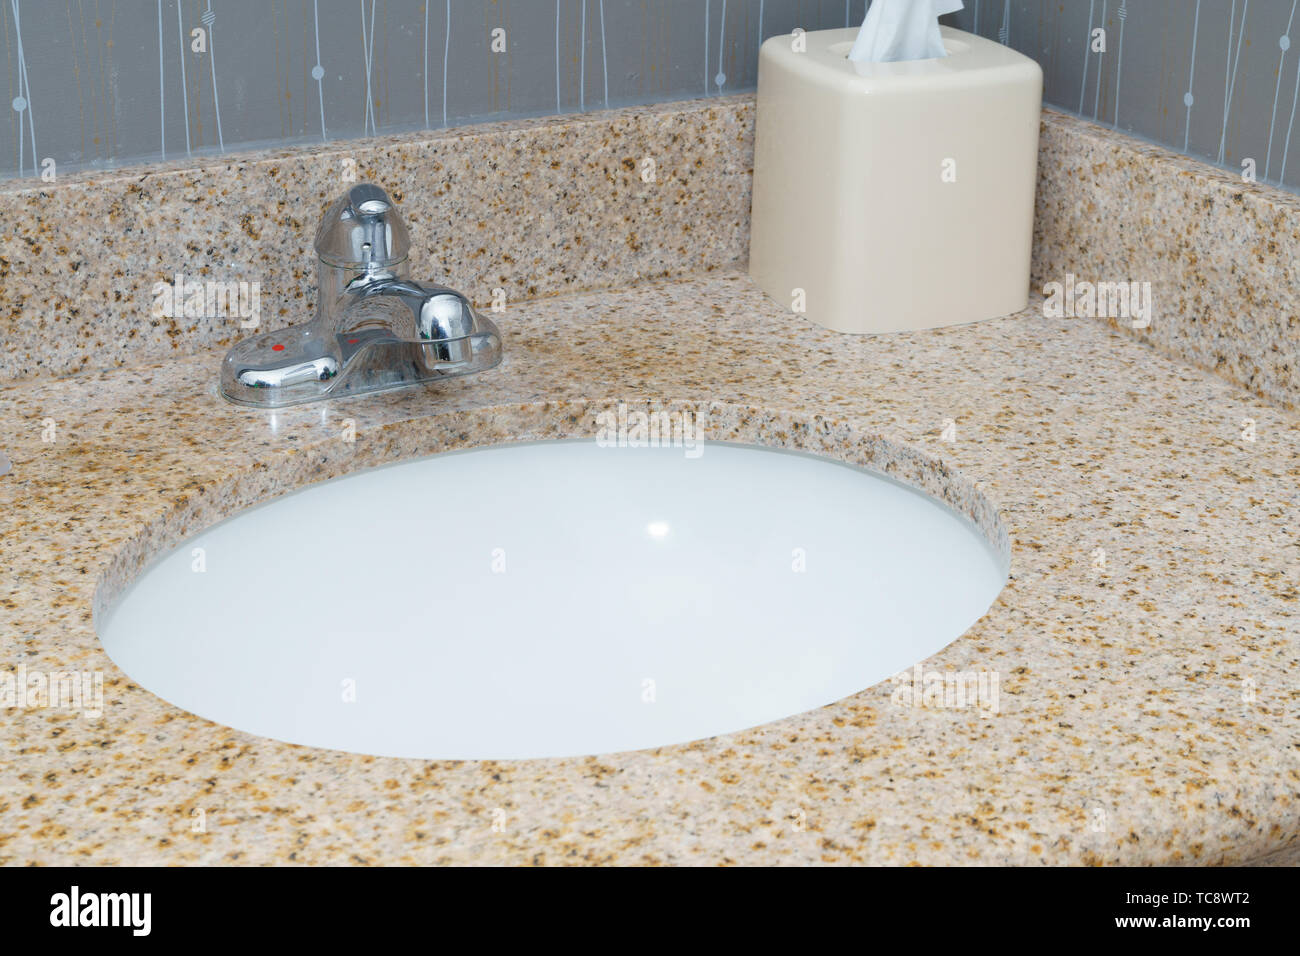 images of outdated bathroom sink faucets